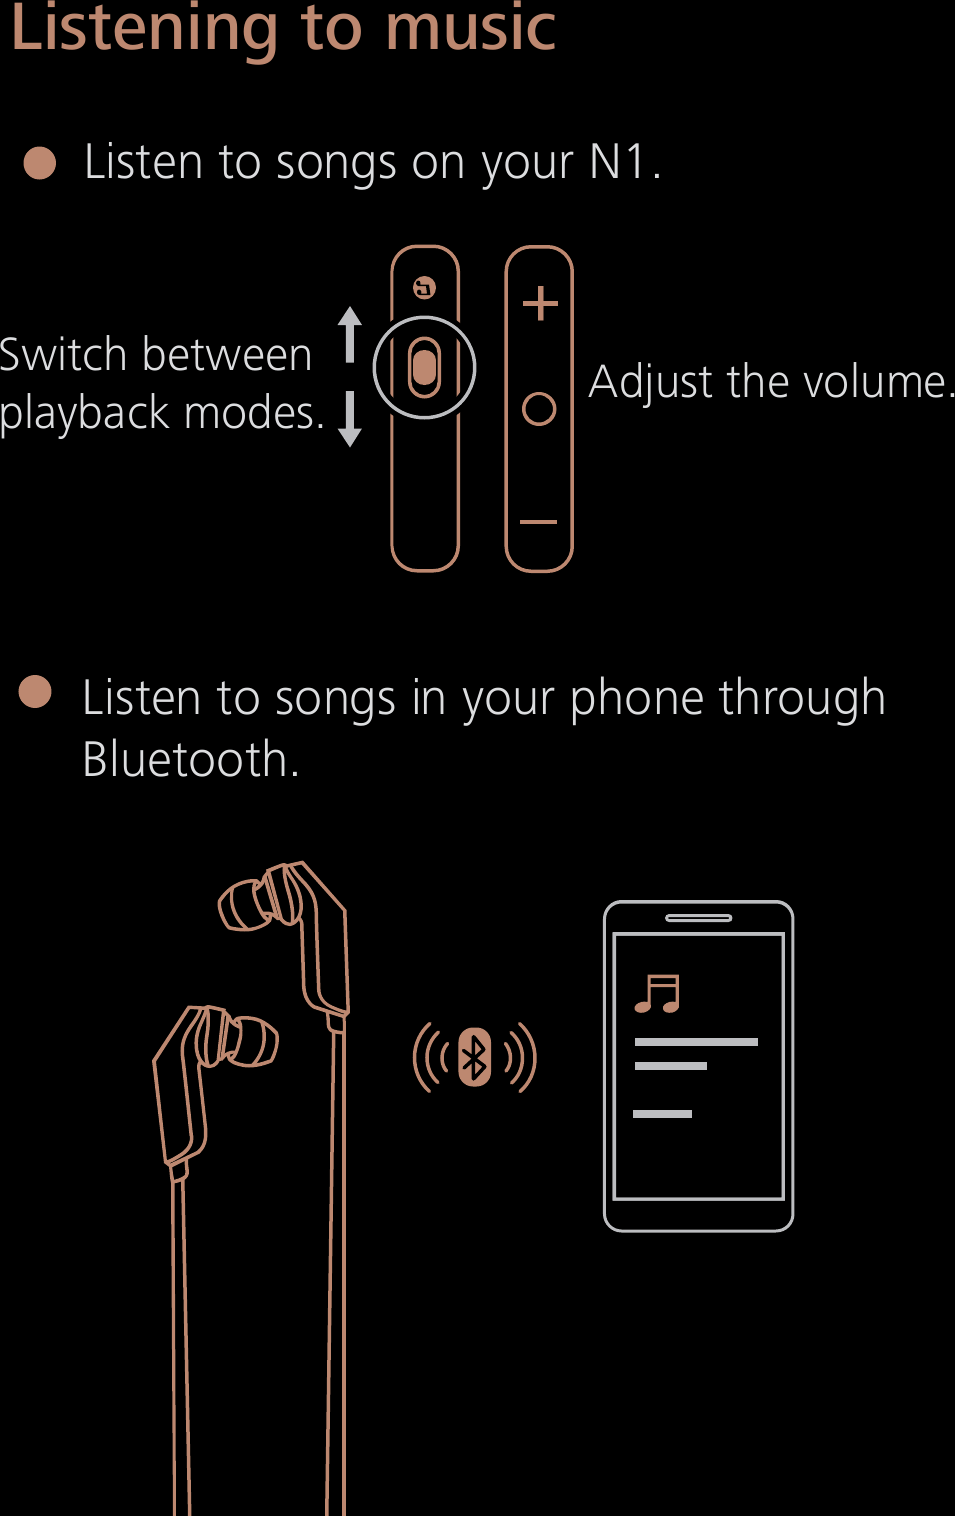 Listen to songs on your N1.Listen to songs in your phone throughBluetooth.Switch betweenplayback modes. Adjust the volume.Listening to music